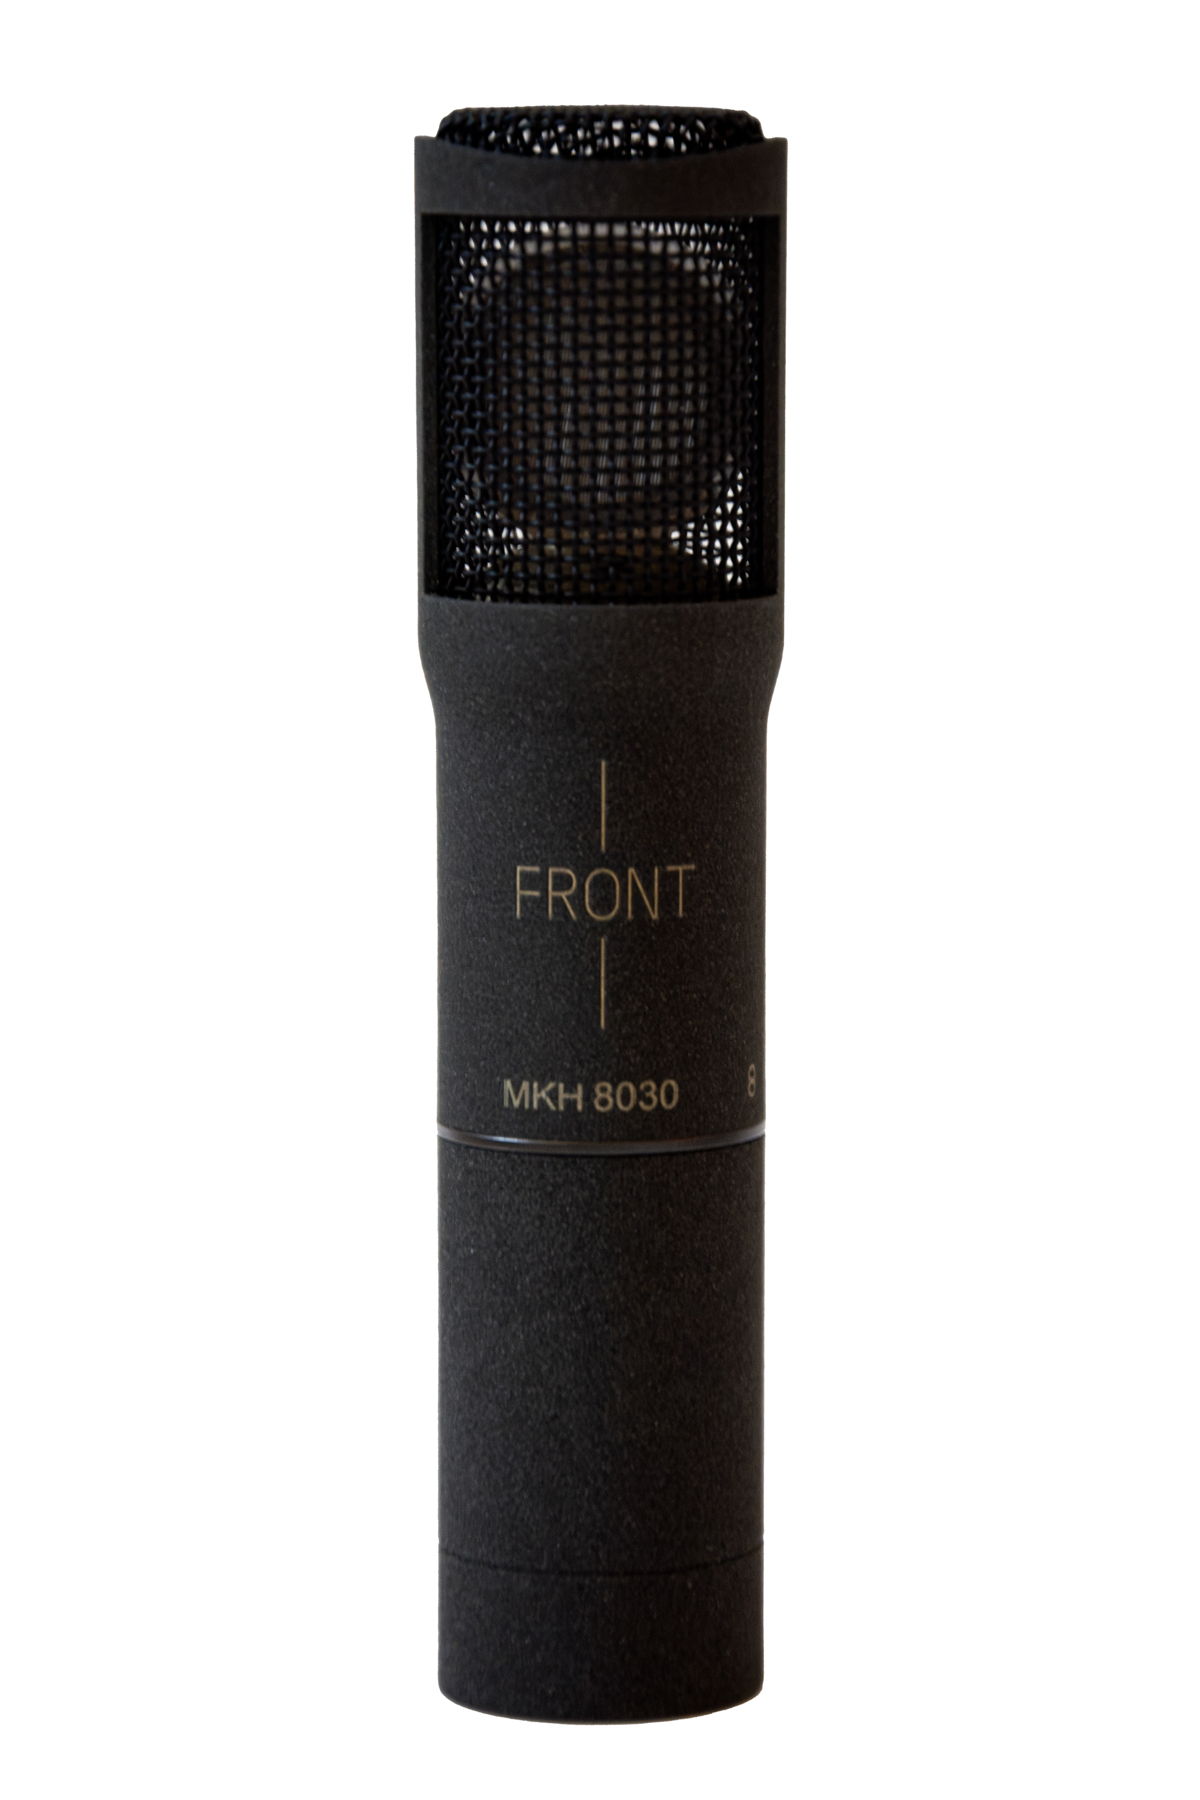 The MKH 8030 figure-of-eight RF condenser microphone is extremely compact with a diameter of 19/21 mm and a length of 93 mm including the XLR module (preview photo only)